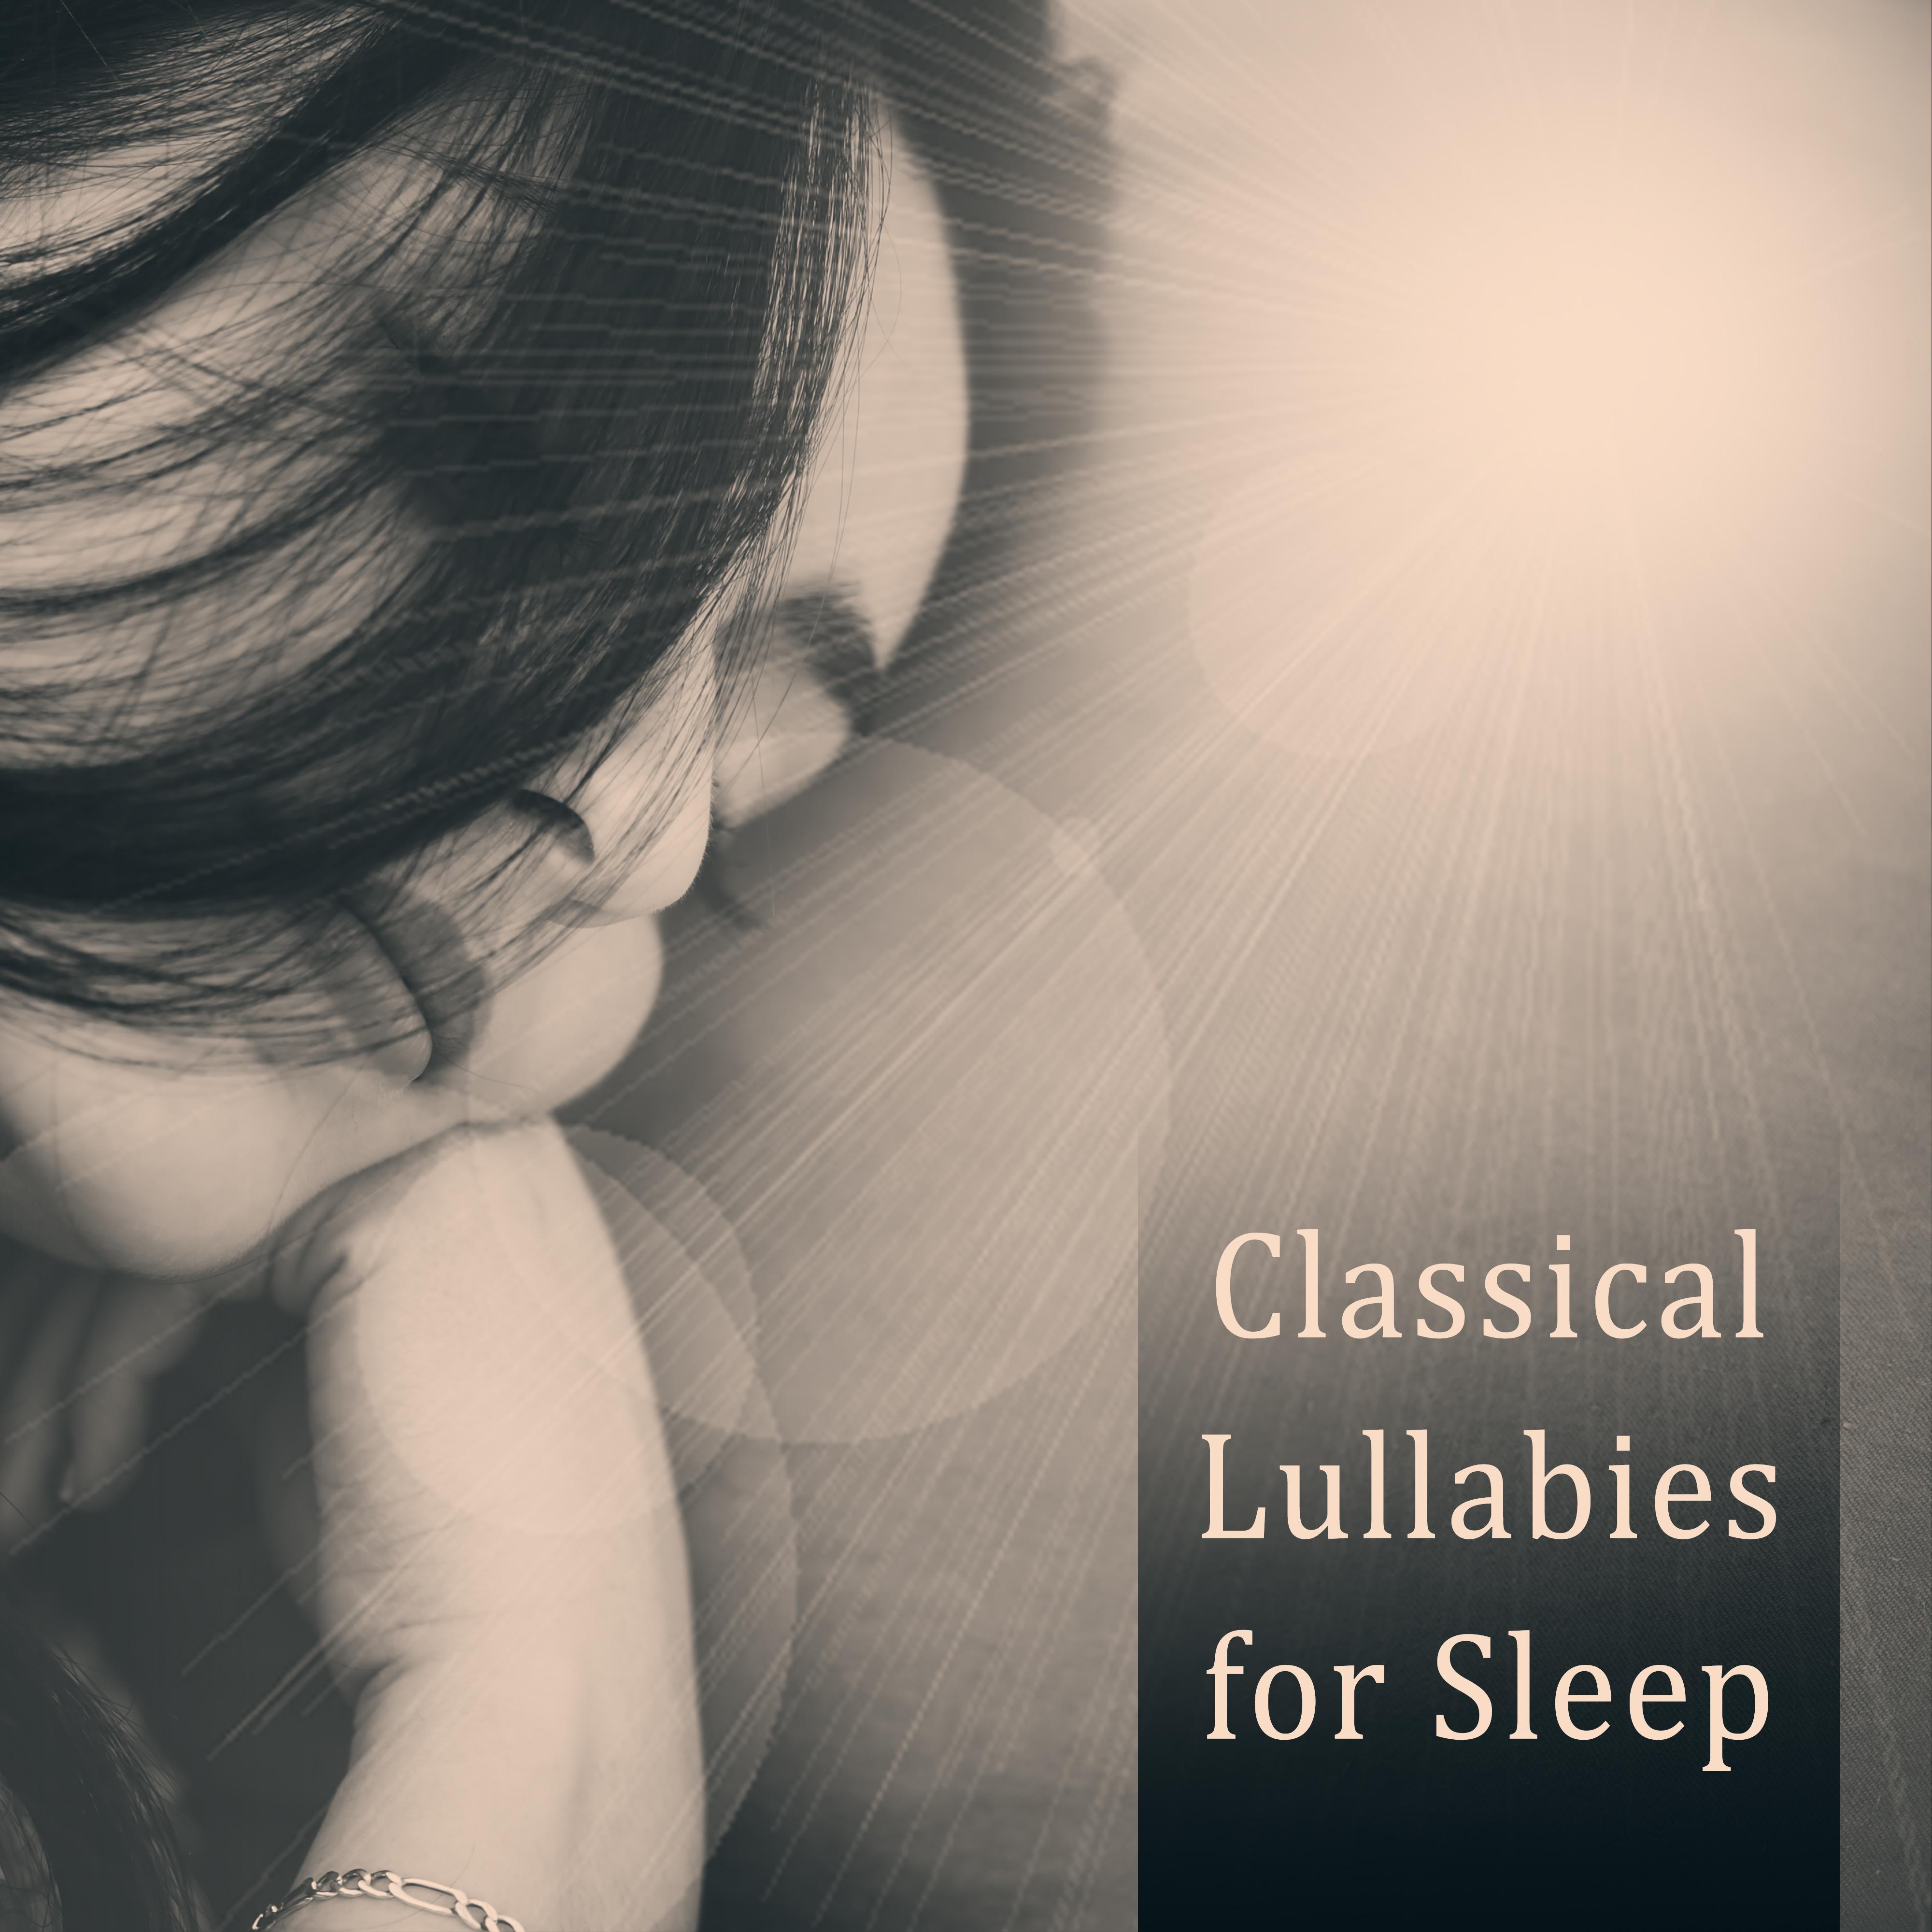 Classical Lullabies for Sleep  Relaxing Music, Ambient Instrumental Music